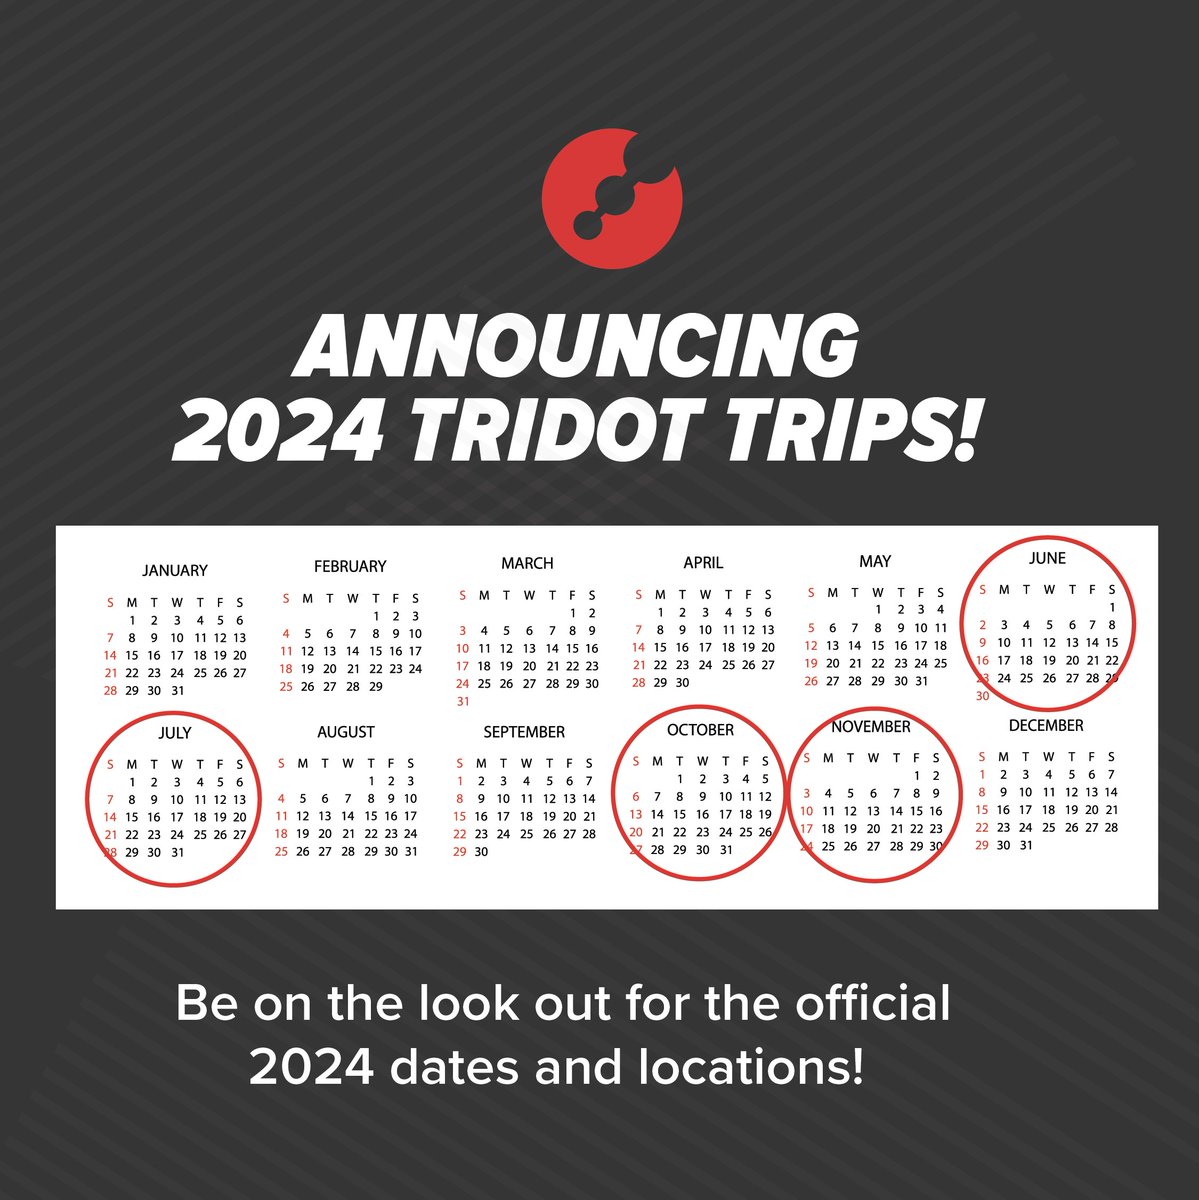 The 2024 TriDot Trips powered by RaceQuest are being announced later this week. 

What are your guesses for the locations❓

#IAMTriDot #TriDot